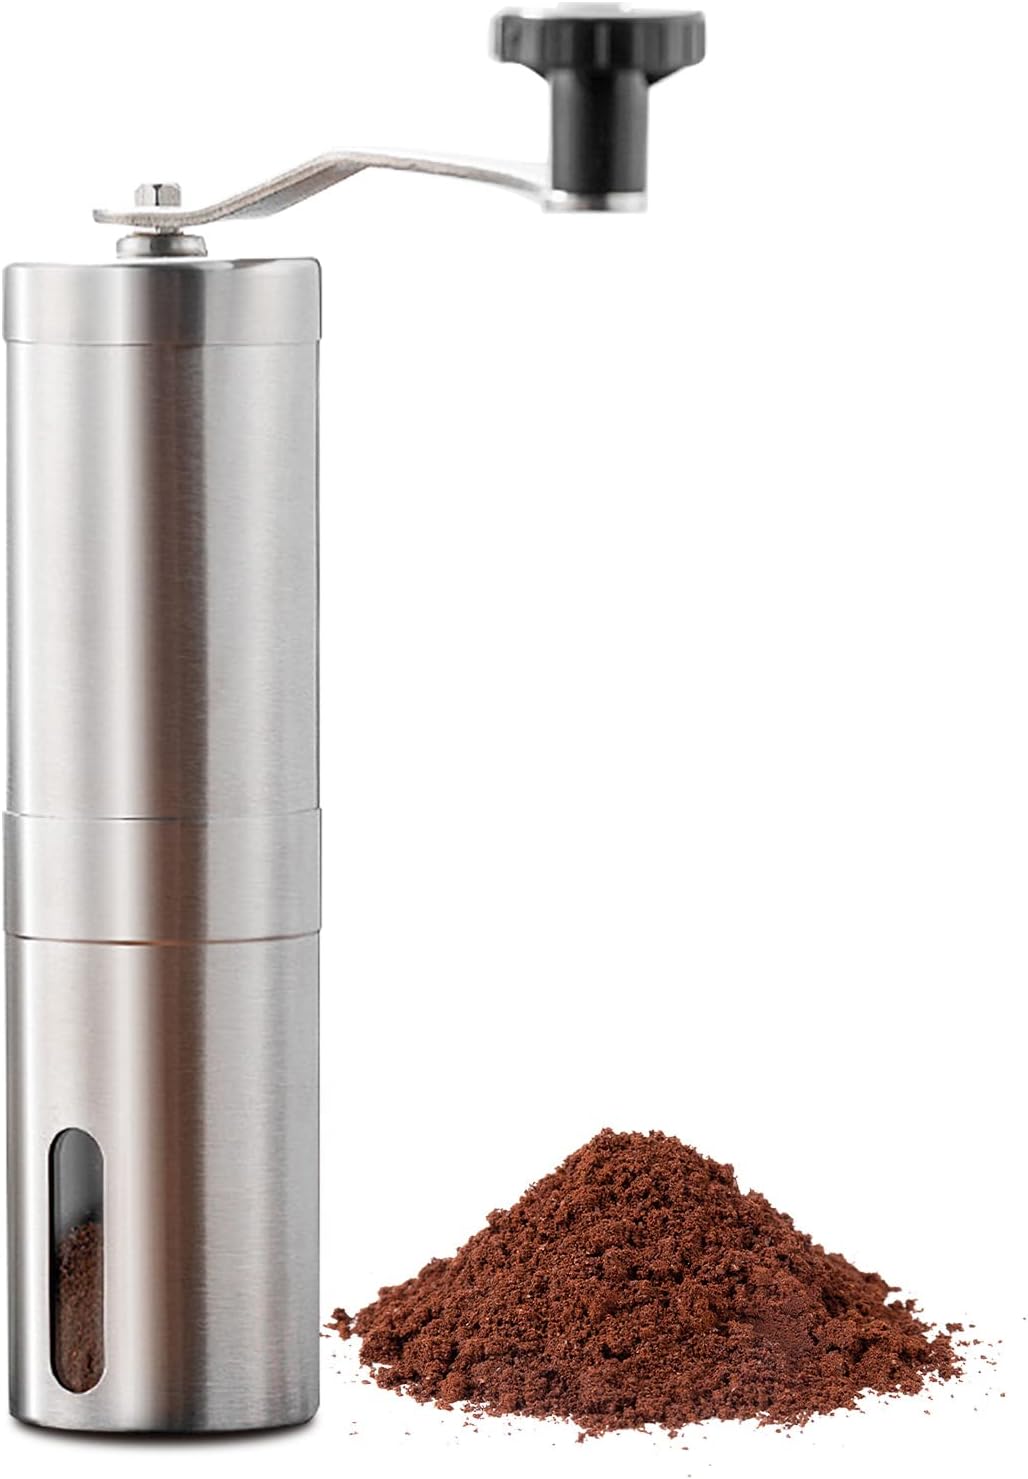 QIYUEXES Manual Coffee Grinder Review: A Portable and Stylish Brewing Companion